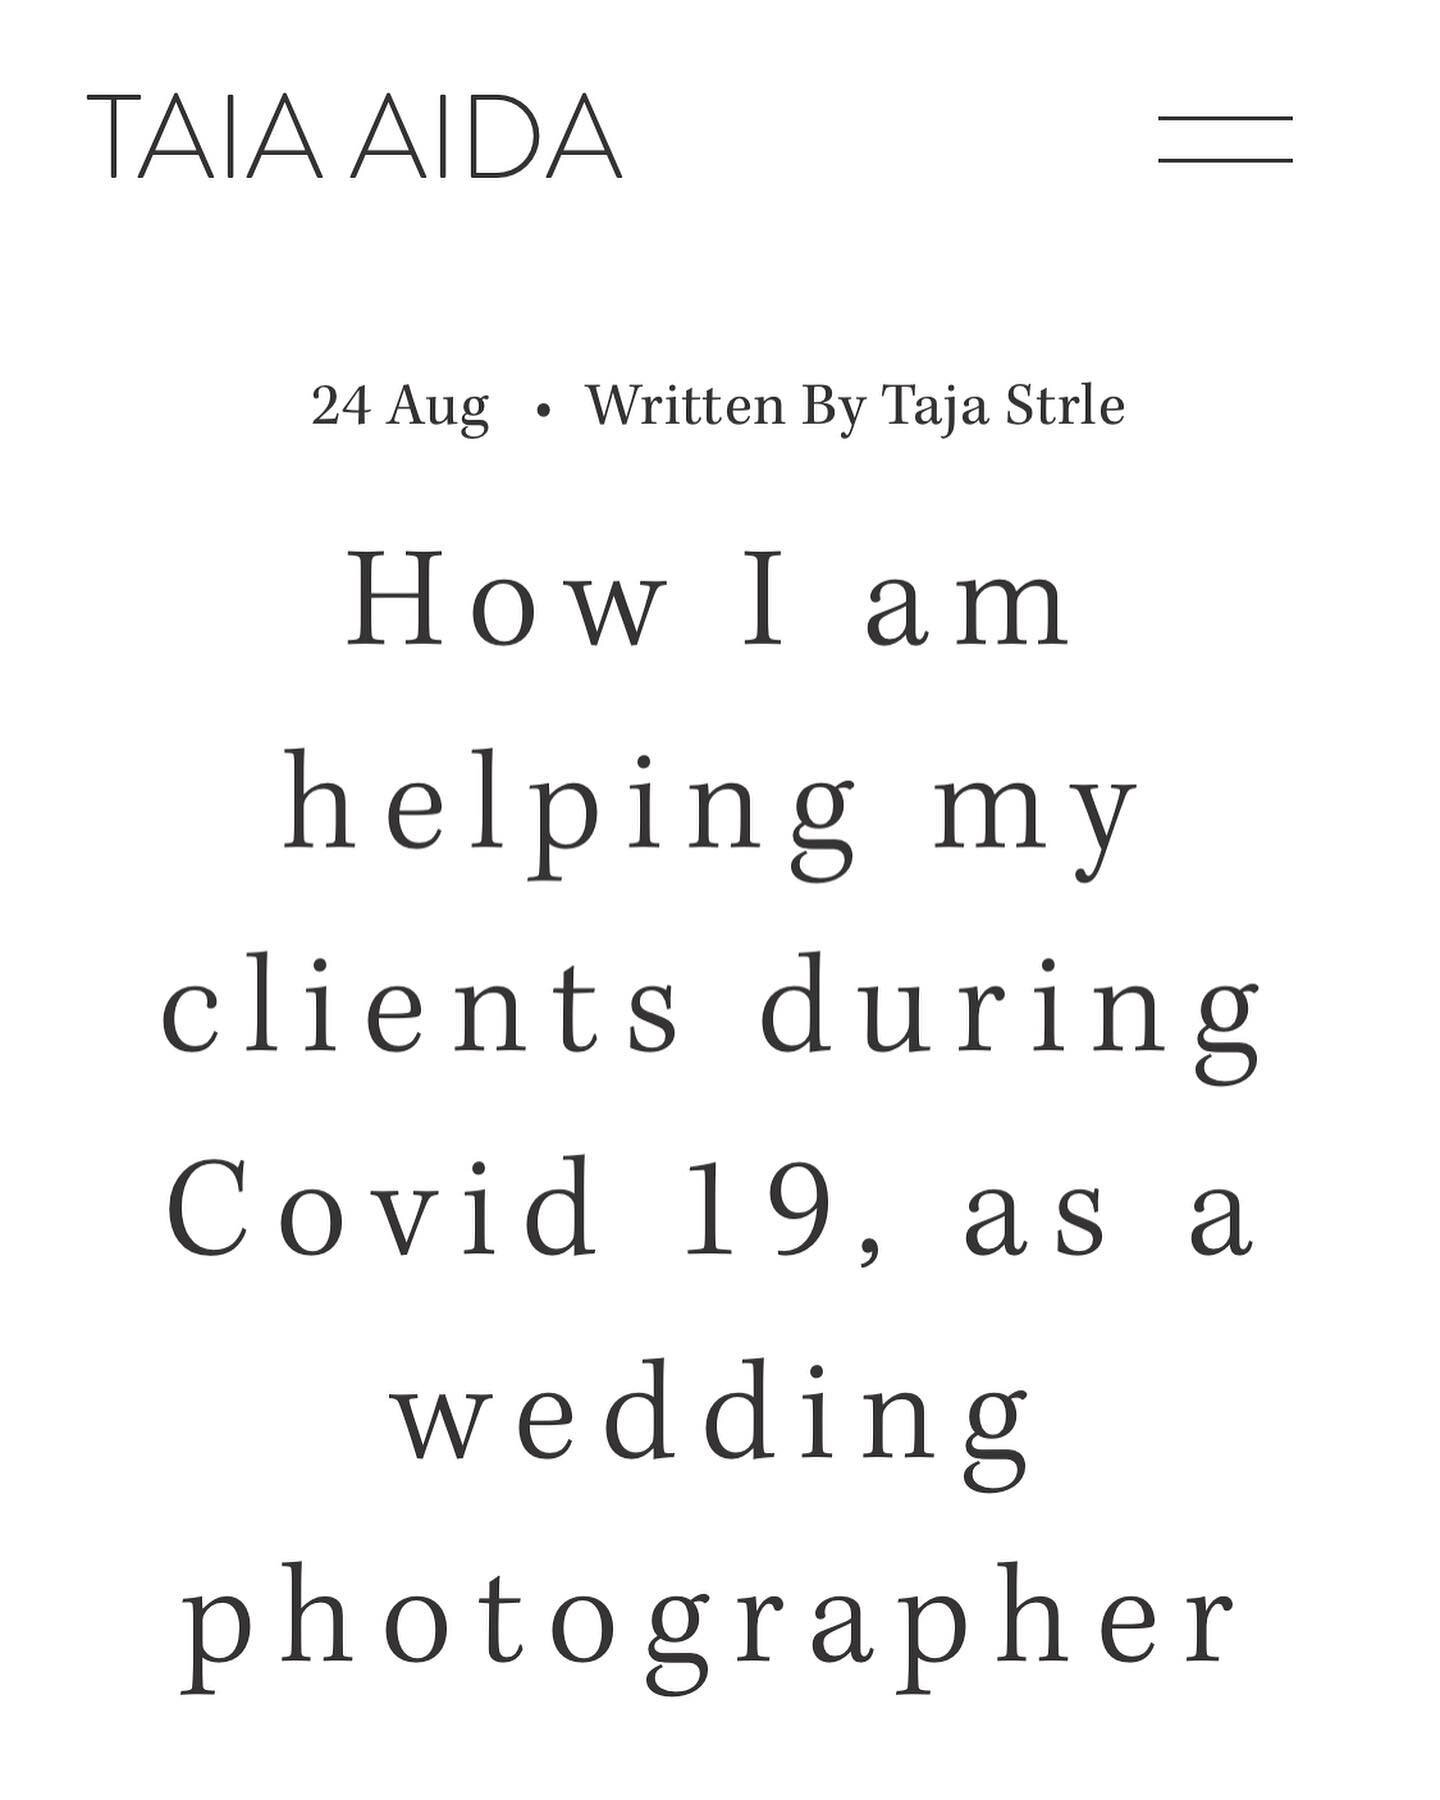 New blog post is out, and it is a look at some of the steps I am taking to help you book a wedding worry free, in spite of Covid 19! 🦋

Have a look at it at: 

taiaaida.co.uk/blog/wedding-photography-covid19

~

#weddingphotographycoronavirus #weddi